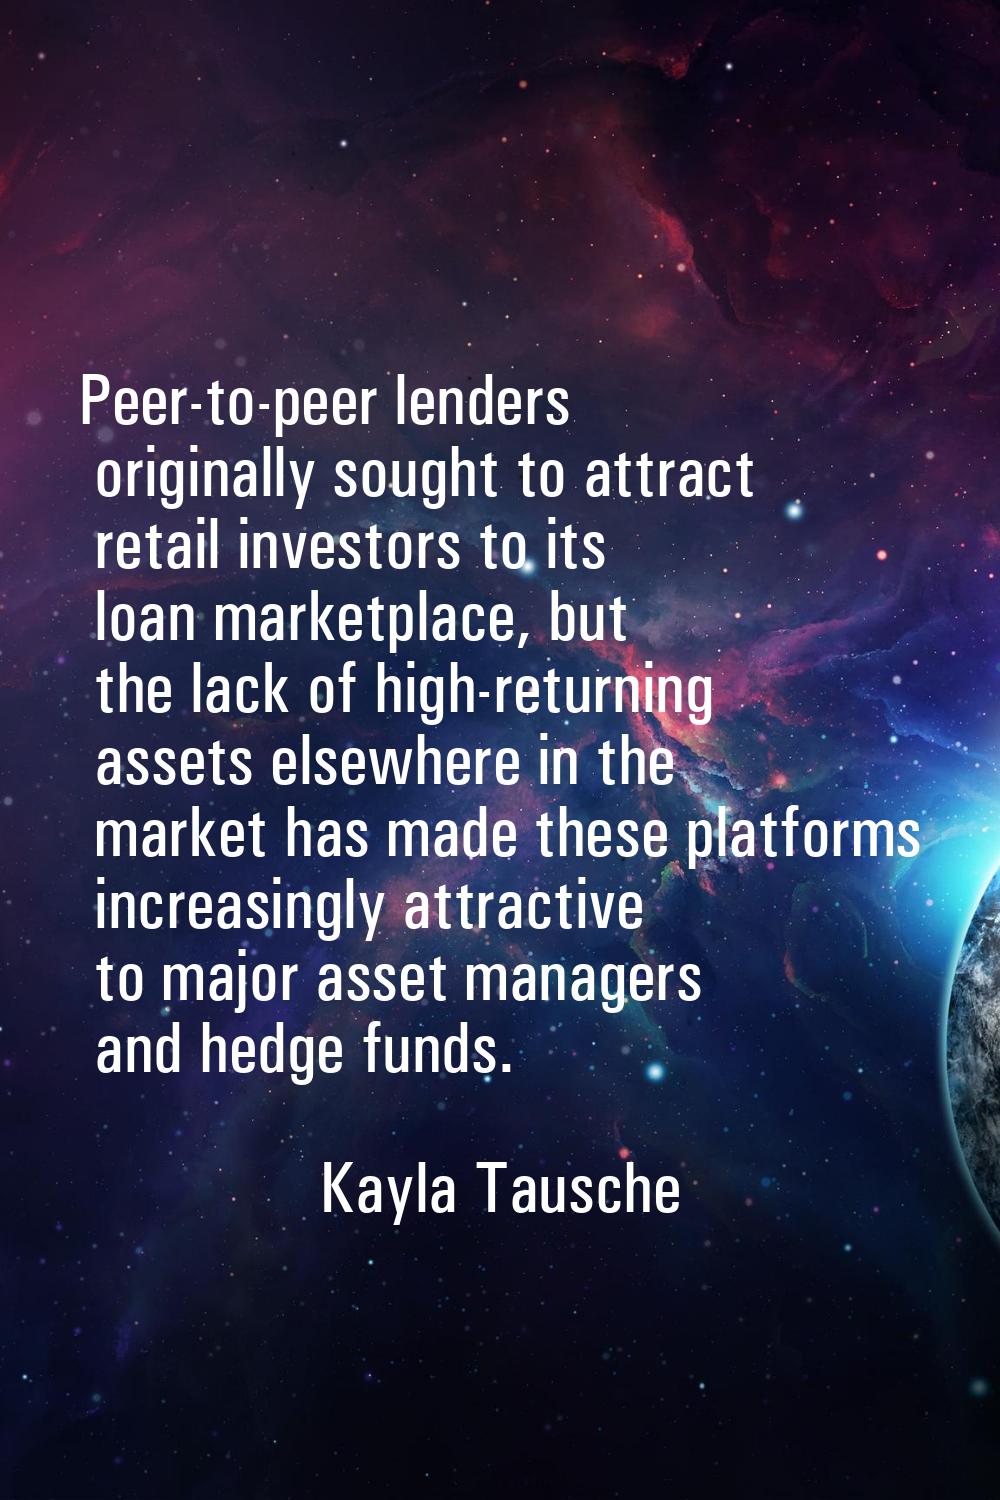 Peer-to-peer lenders originally sought to attract retail investors to its loan marketplace, but the